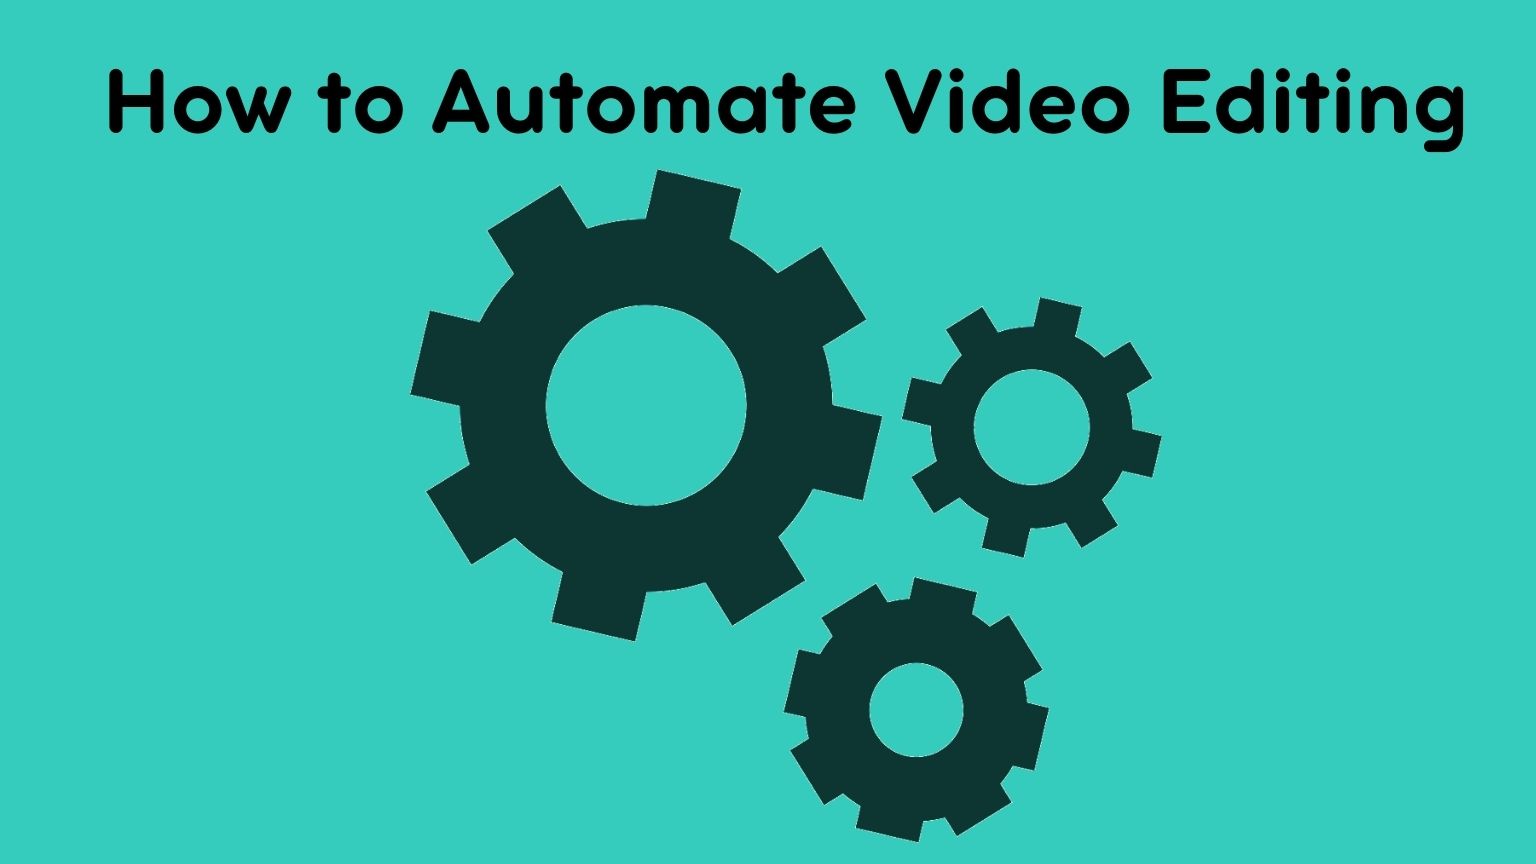 How to Automate Video Editing